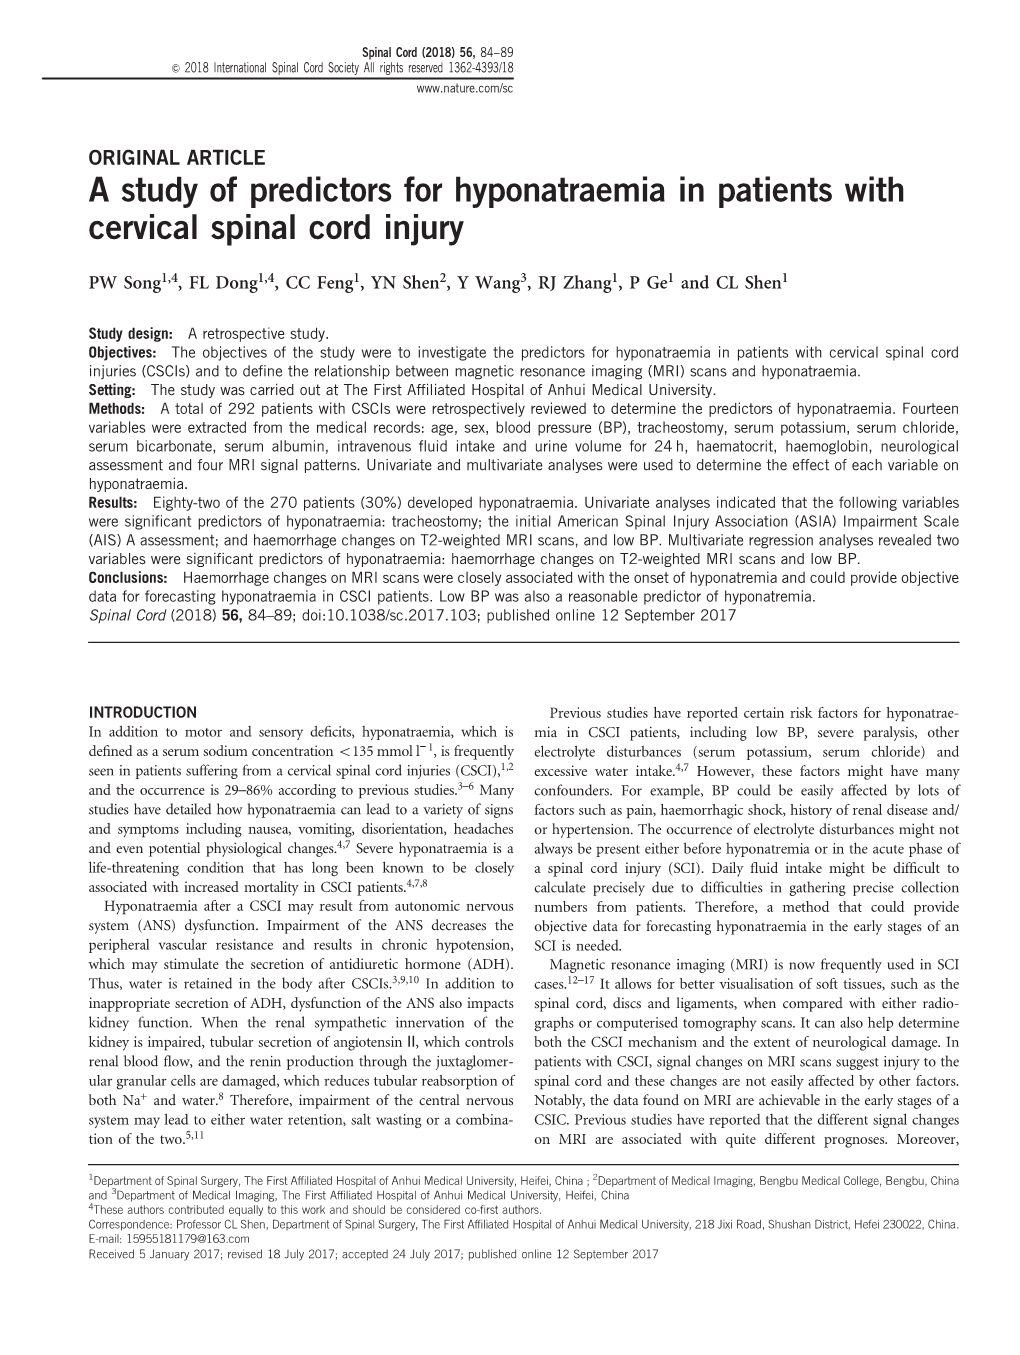 A Study of Predictors for Hyponatraemia in Patients with Cervical Spinal Cord Injury